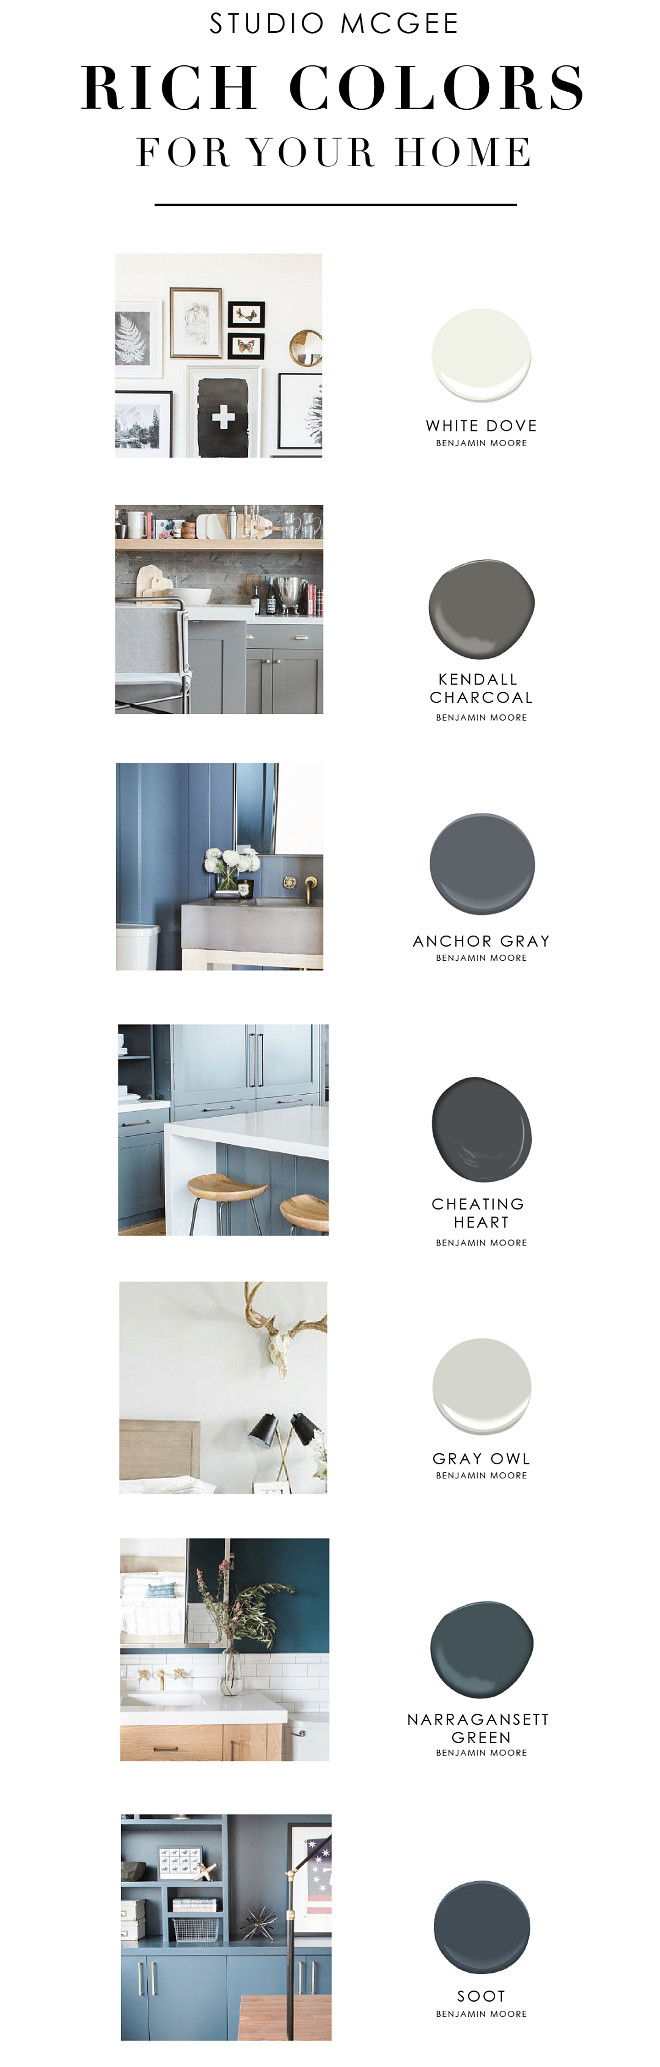 New and Fresh Paint Colors for your Home White Dove by Benjamin Moore, Kendall Charcoal by Benjamin Moore, Anchor Gray by Benjamin Moore, Cheating Heart by Benjamin Moore, Gray Owl by Benjamin Moore, Narragansett Green by Benjamin Moore